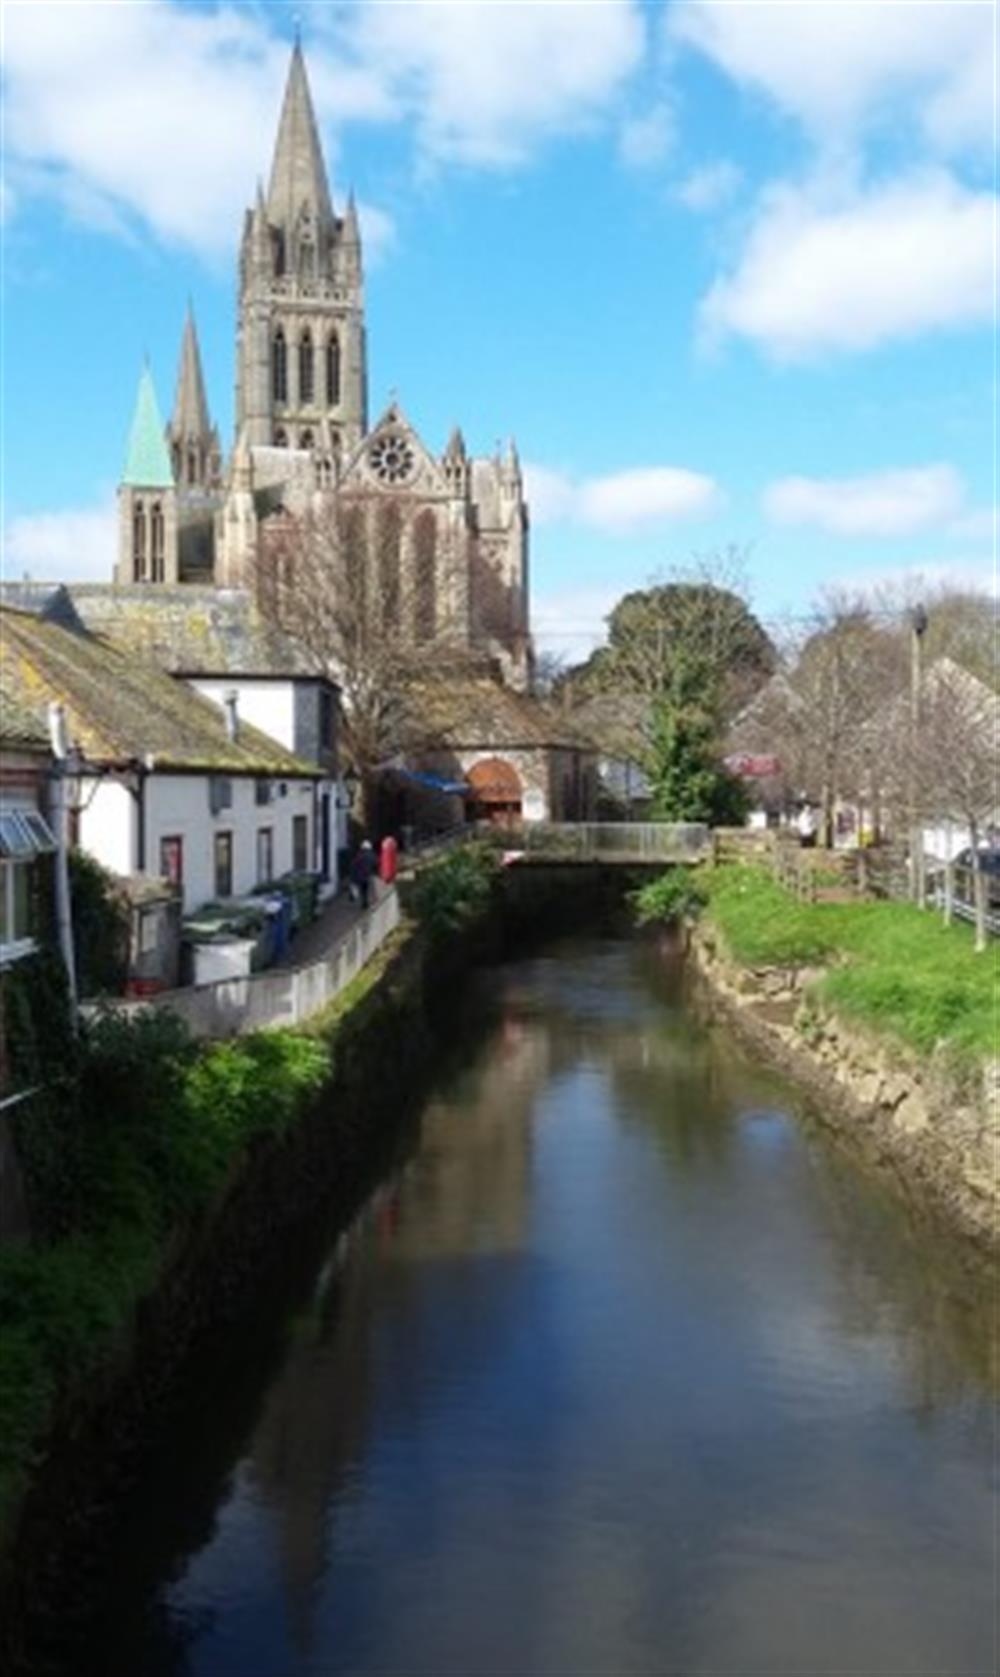 Truro is our main shopping centre, and has a beautiful cathedral.